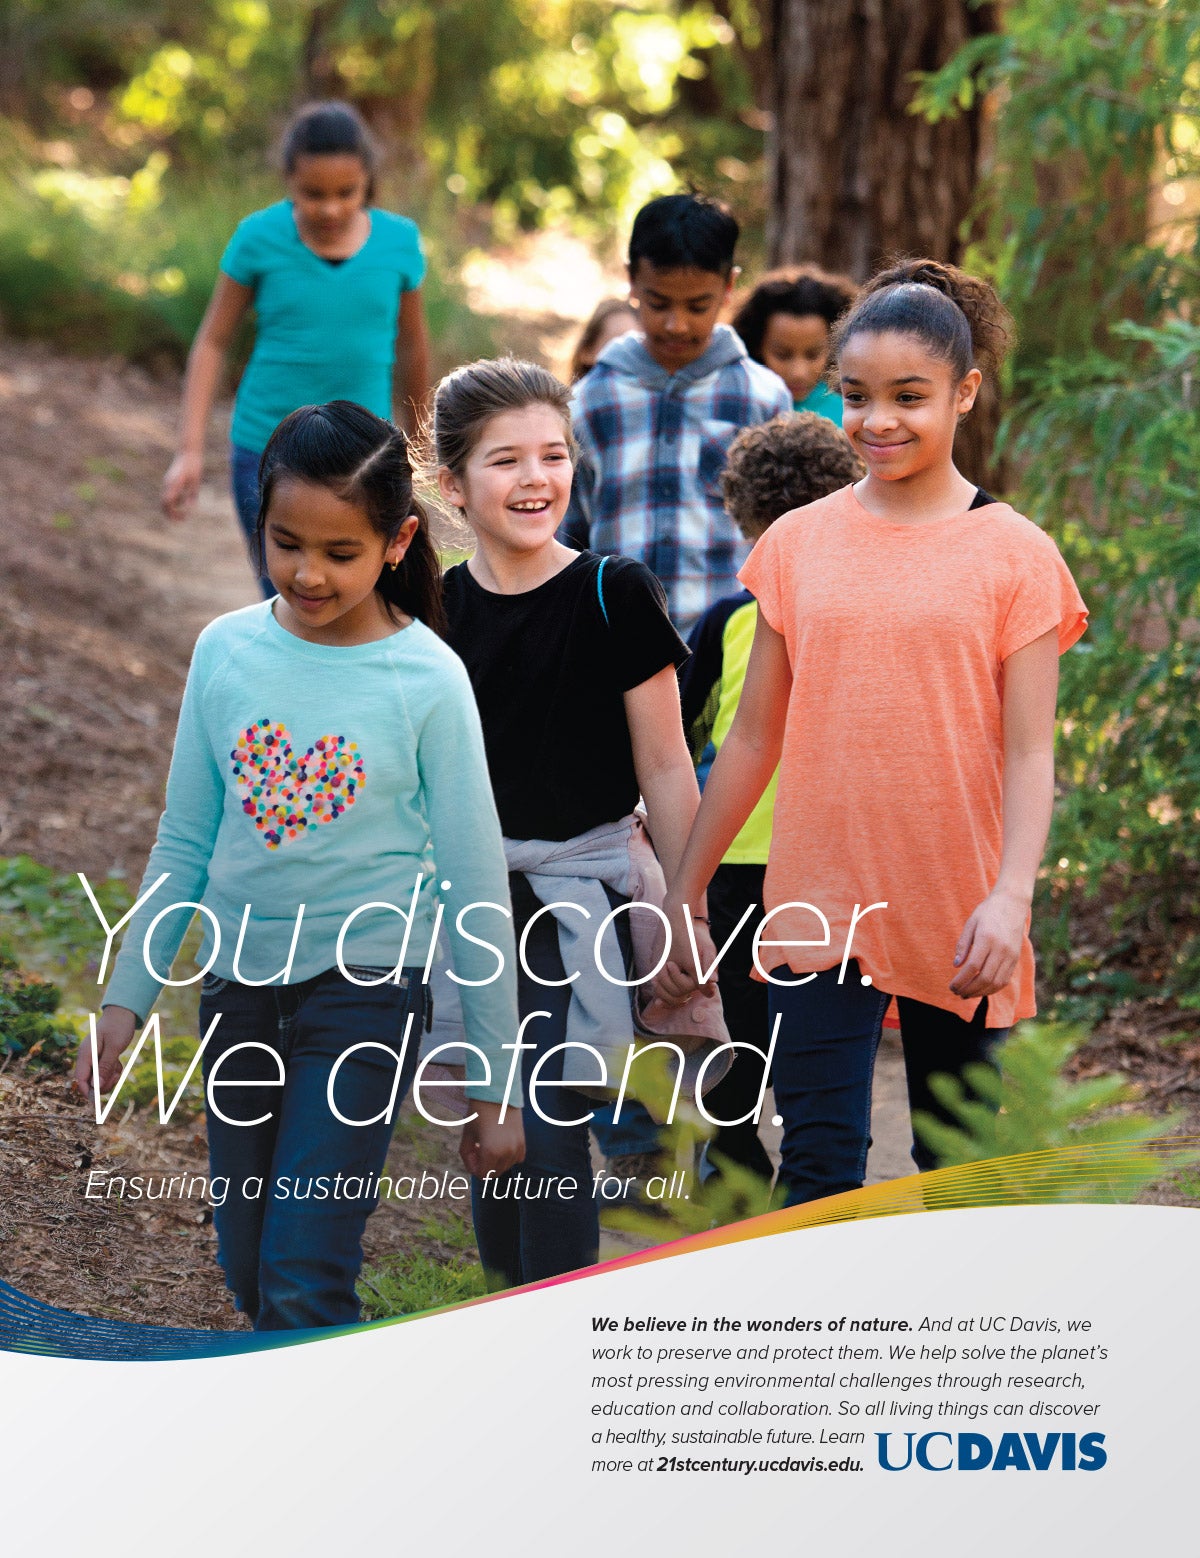 UC Davis ad with text "You discover, we defend"